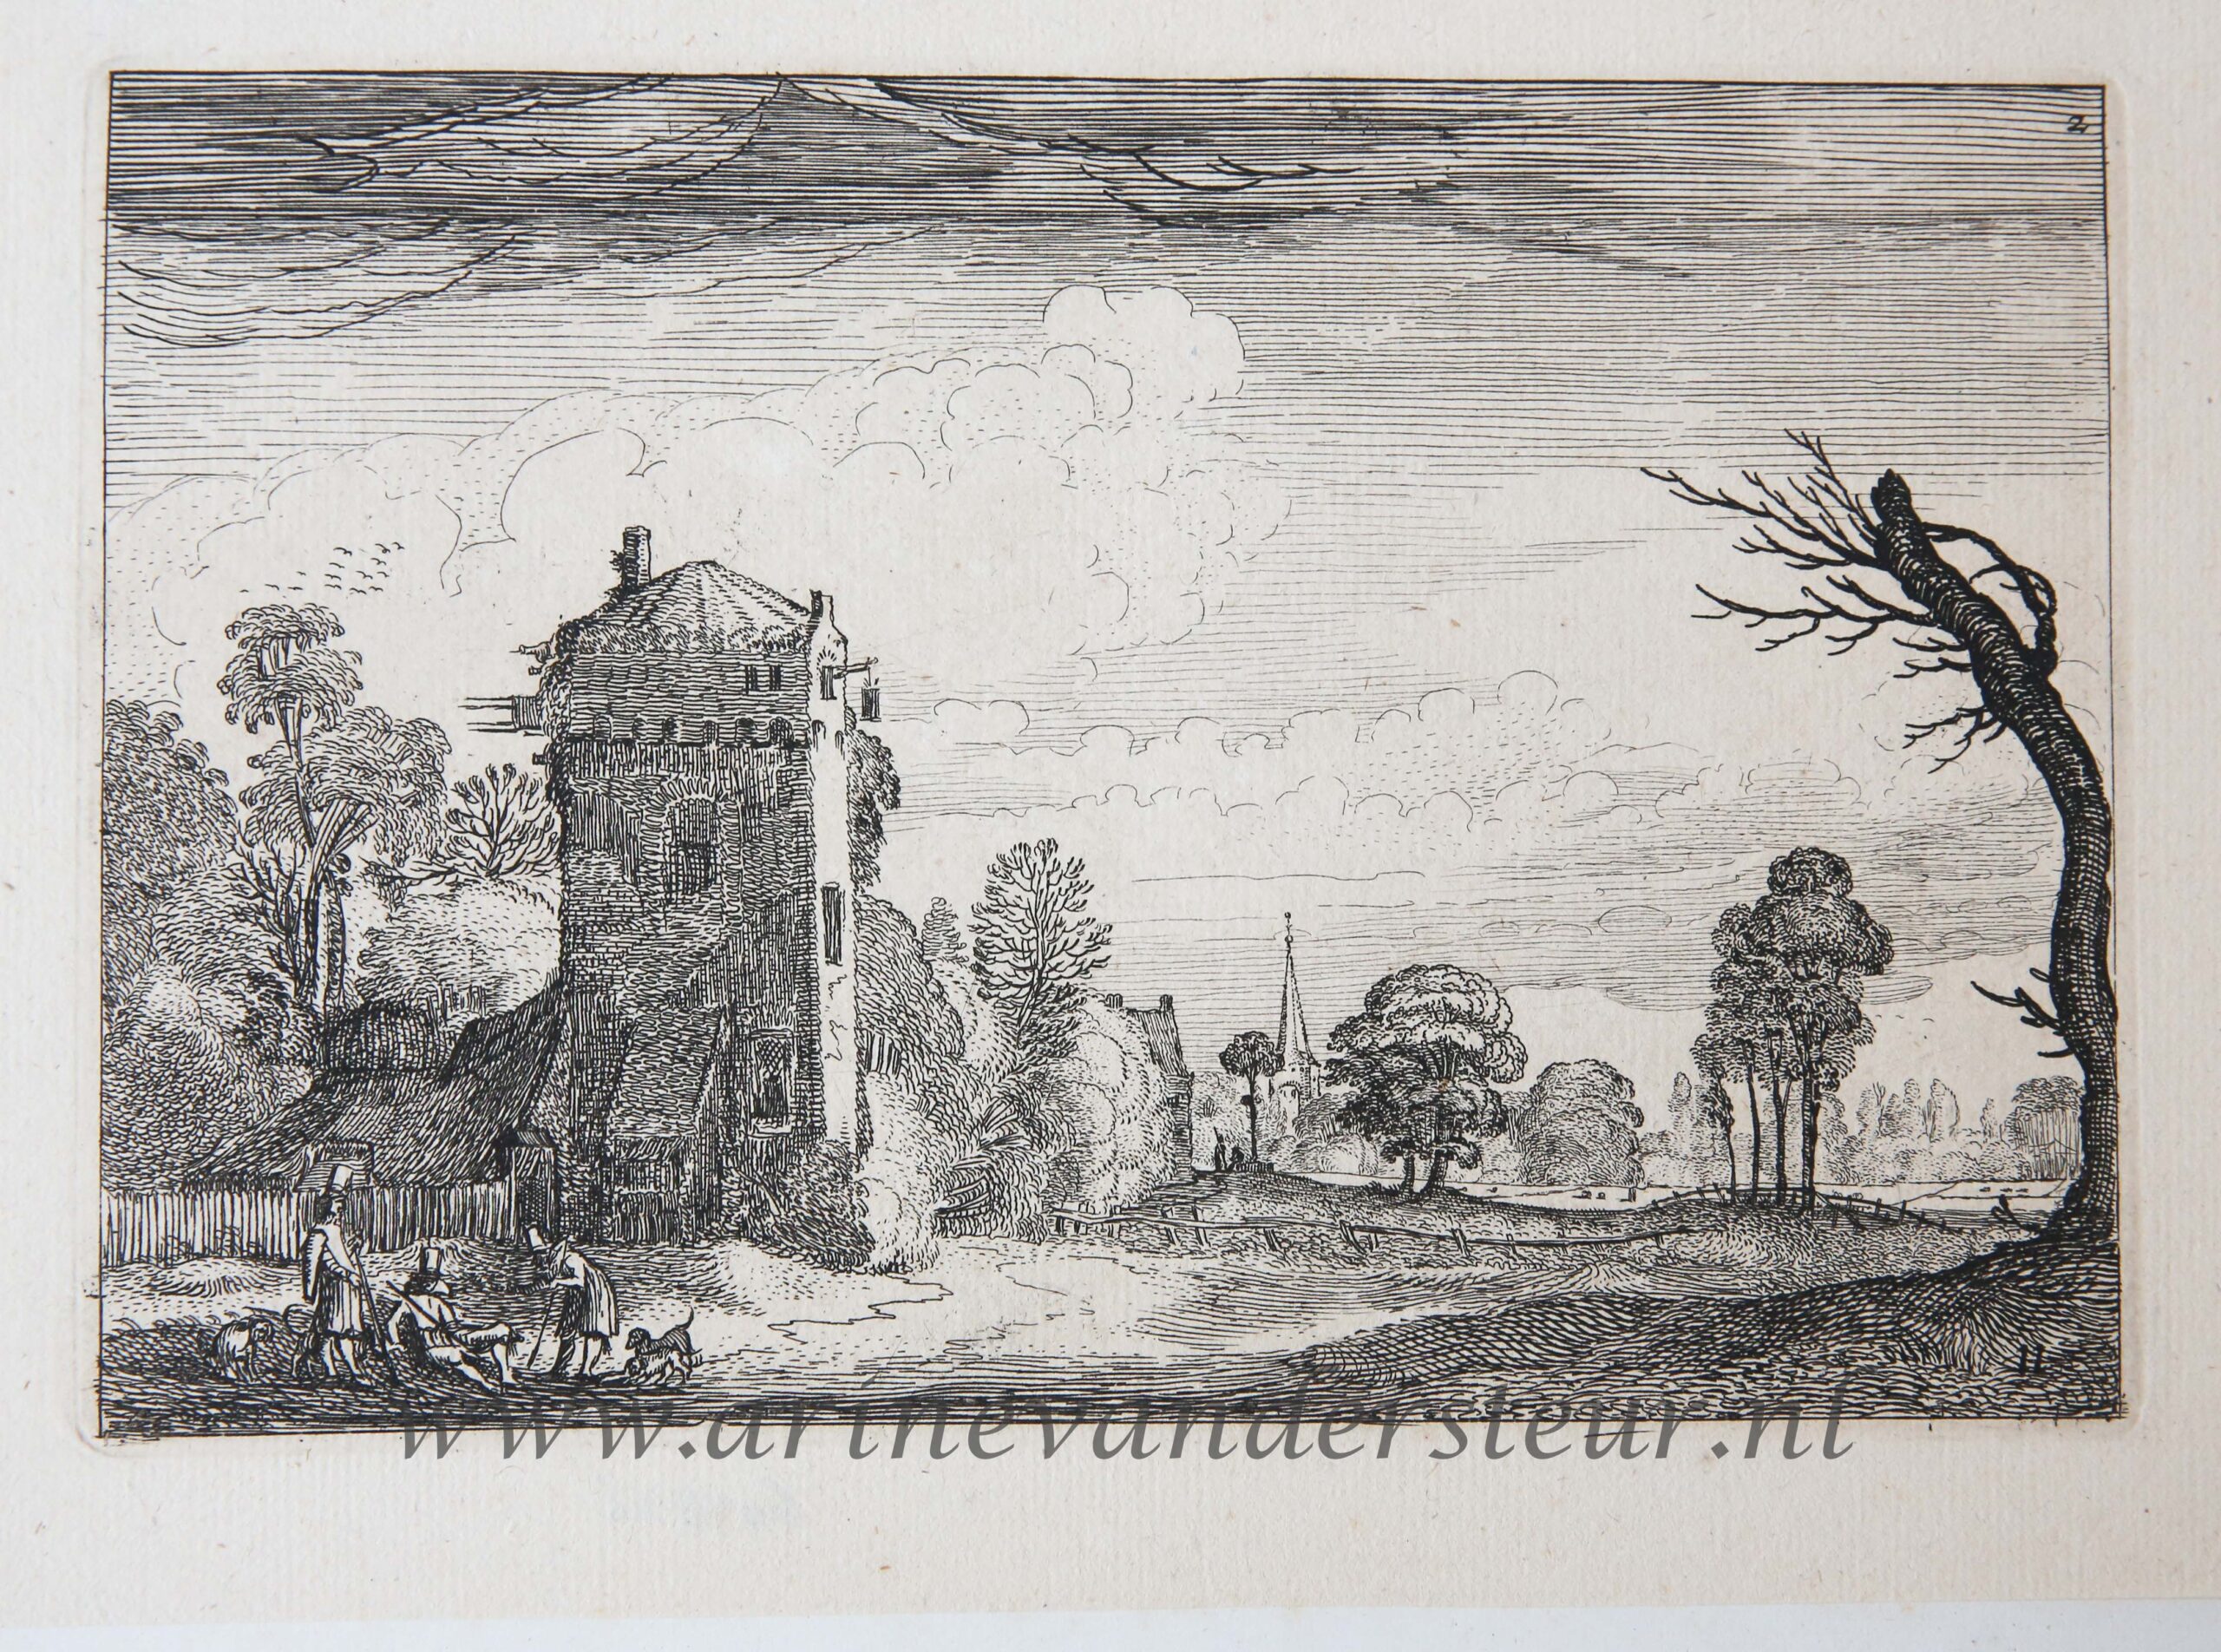 [Antique etching, ets, hunting print] J. v.d. Velde II, Hunters with dogs by a tower in a landscape, published before 1713.